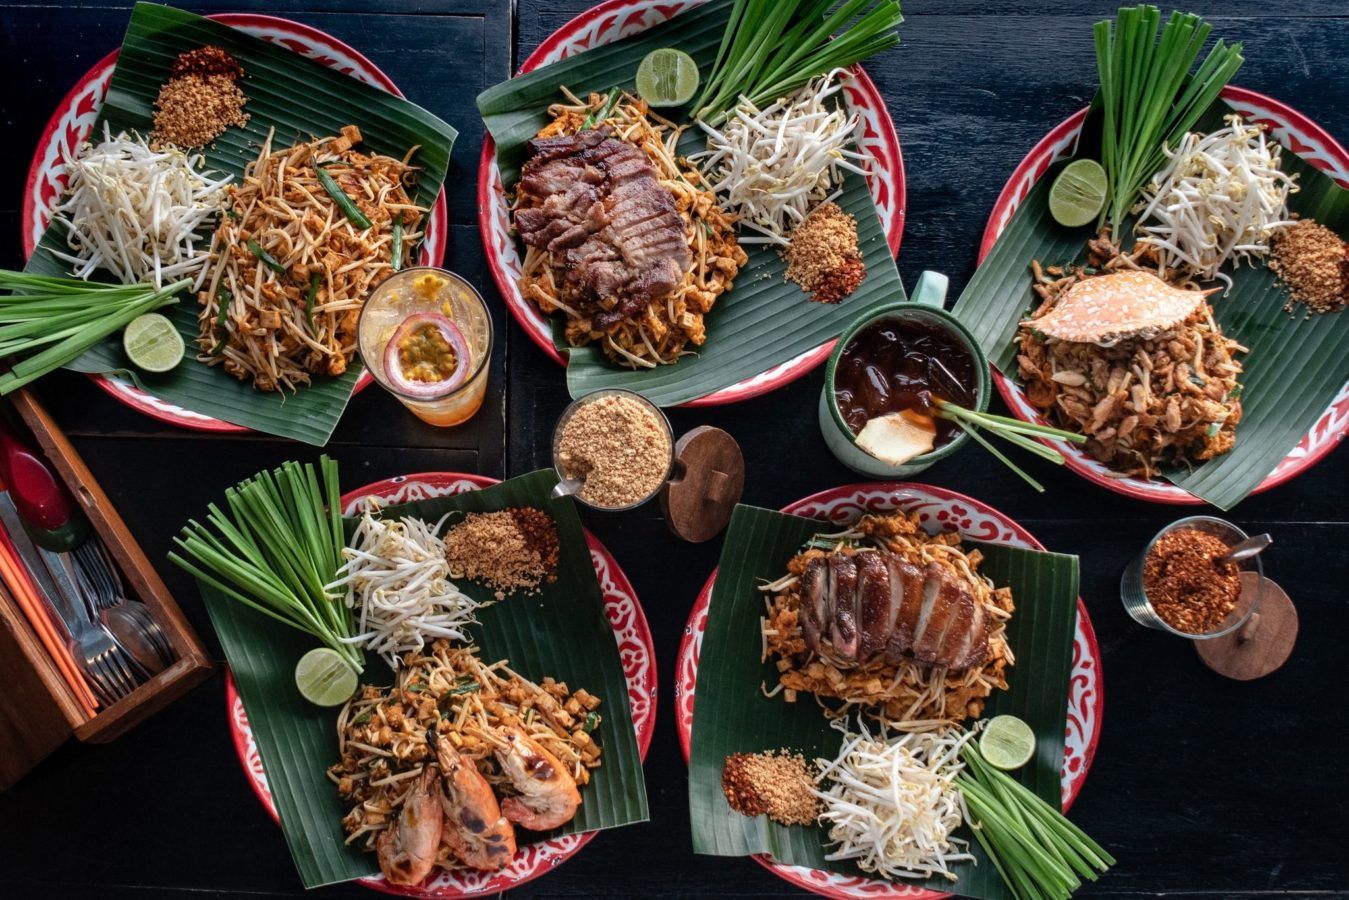 Where to find genuinely good Pad Thai in Bangkok